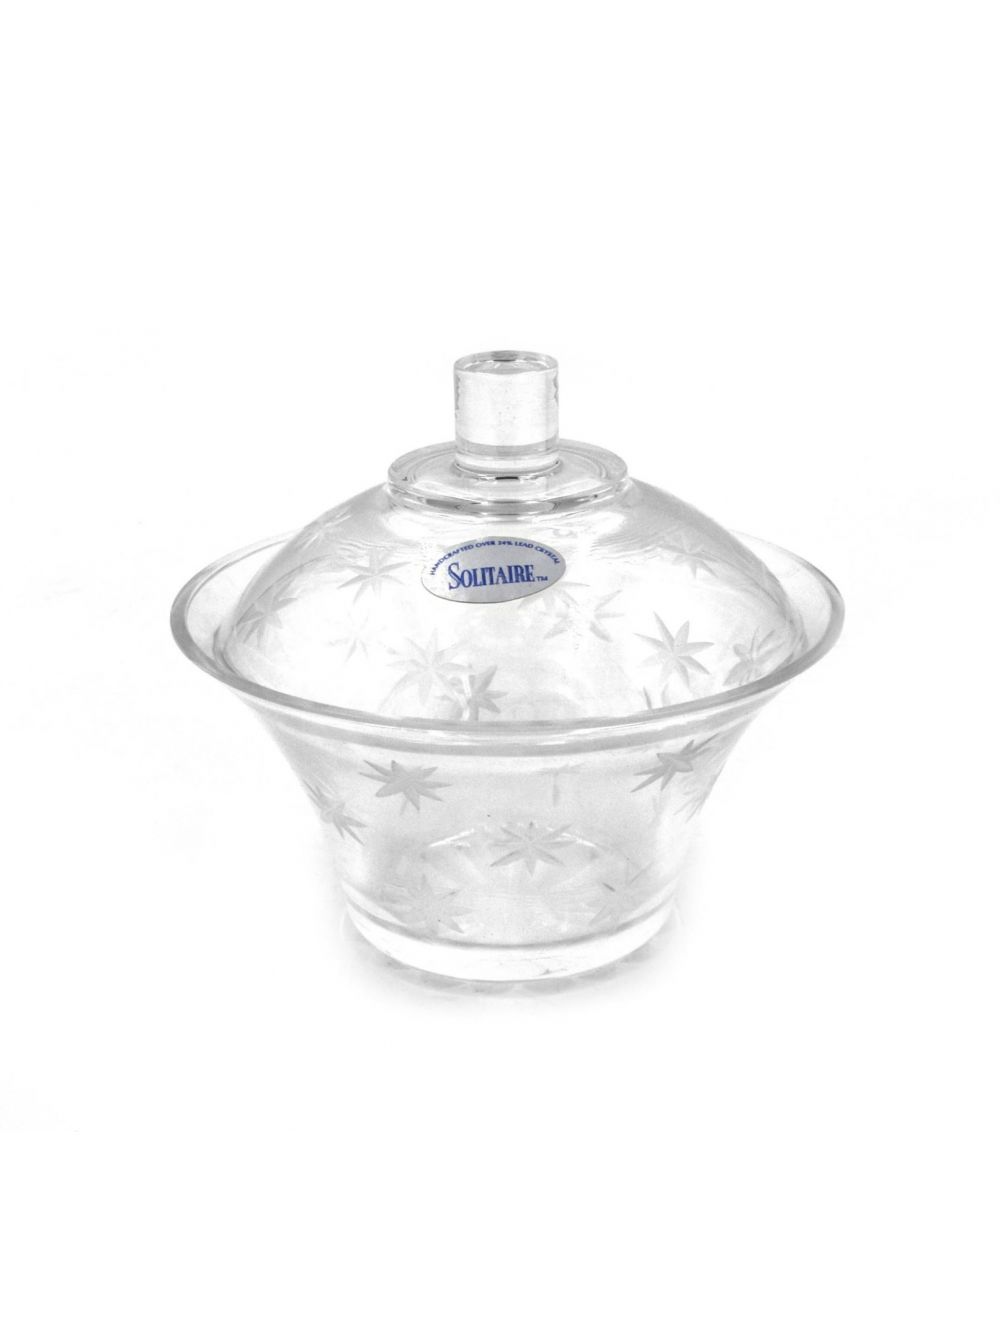 Solitaire Sugar Bowl With Cover Twinkle